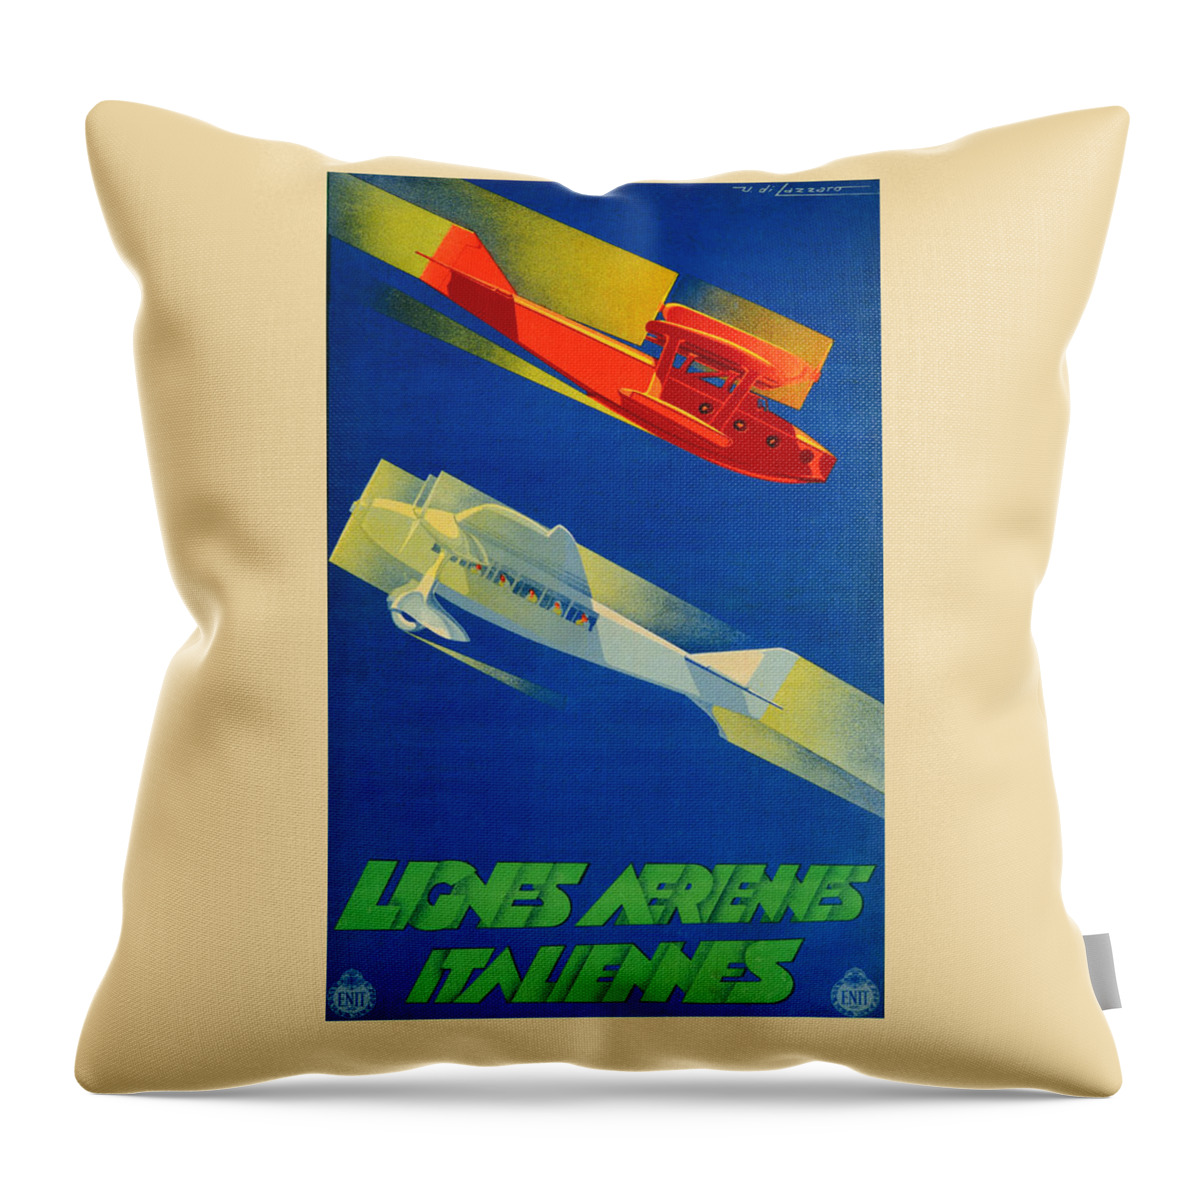 Vintage Airlines Throw Pillow featuring the photograph Aviation Art 83 by Andrew Fare